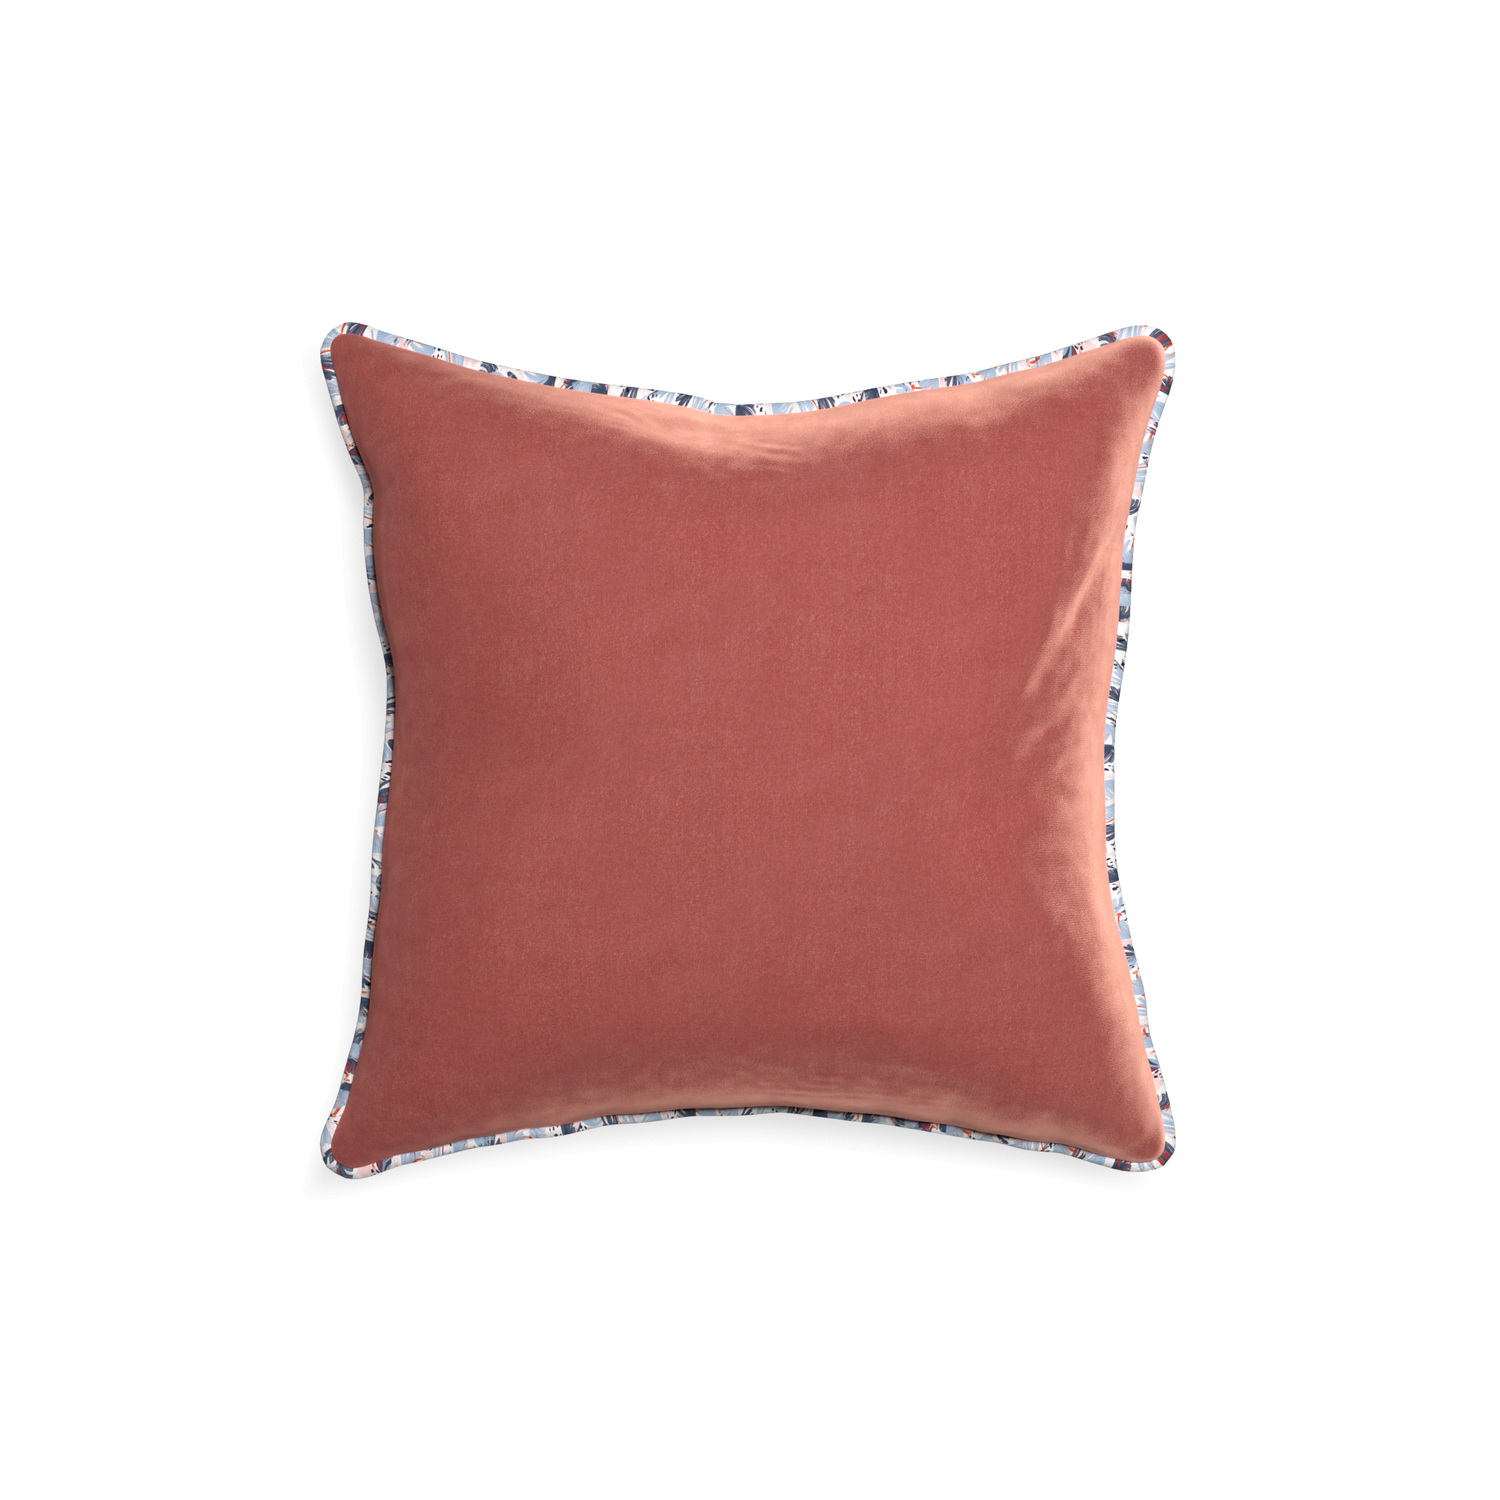 18-square cosmo velvet custom coralpillow with e piping on white background